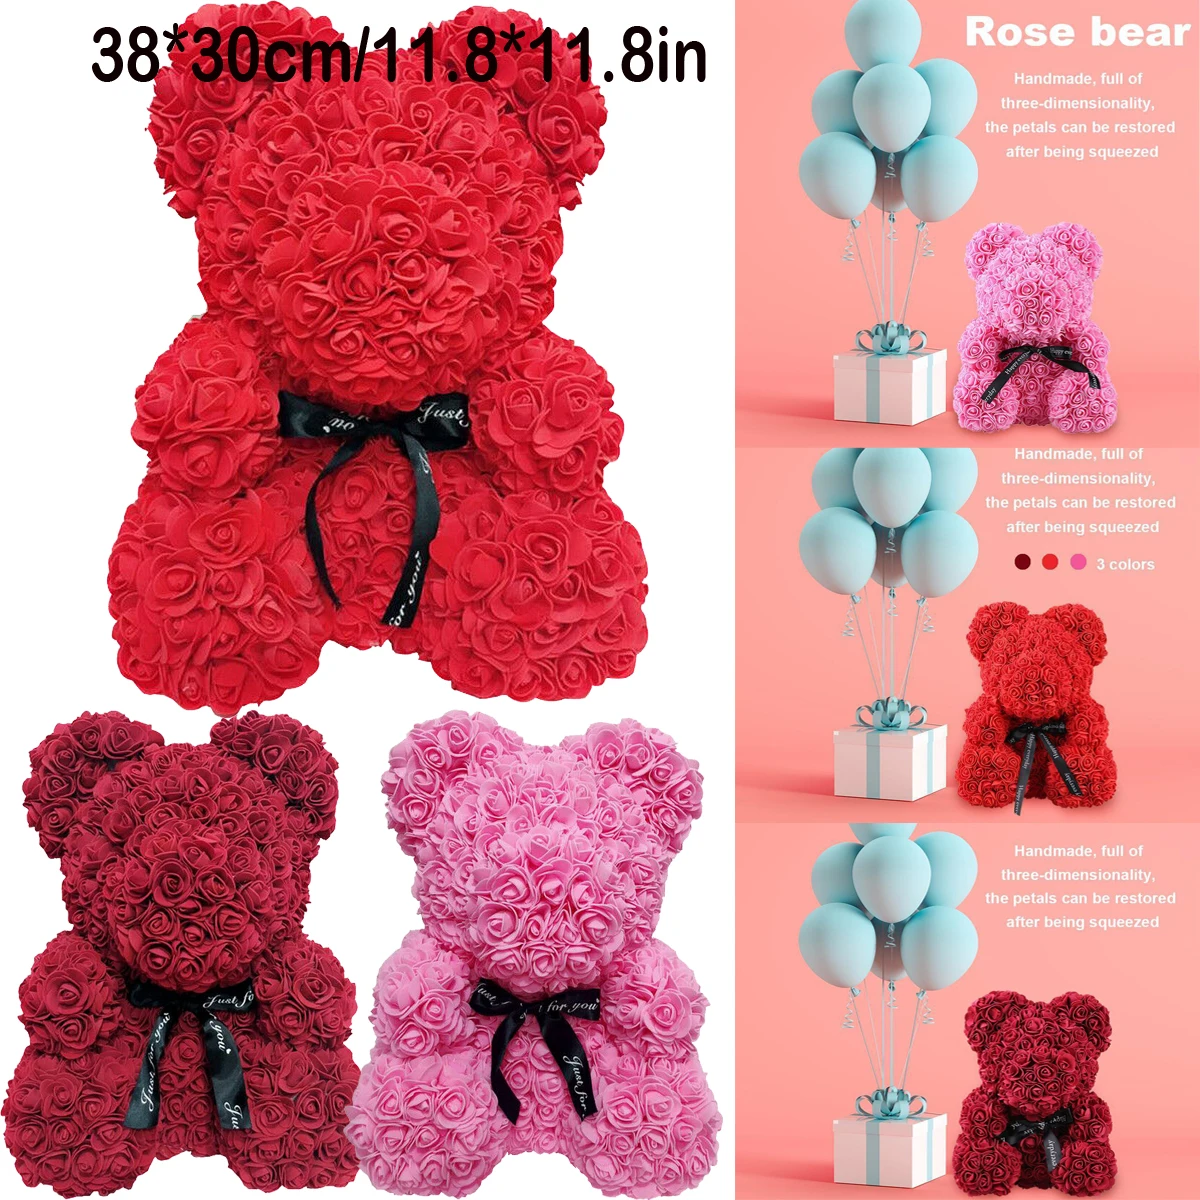 

2019 Romantic Valentine's Day Plush Rose Teddy Bear Cute Christmas Wedding Present With Box Wholesale Dropshipping Pudcoco Hot